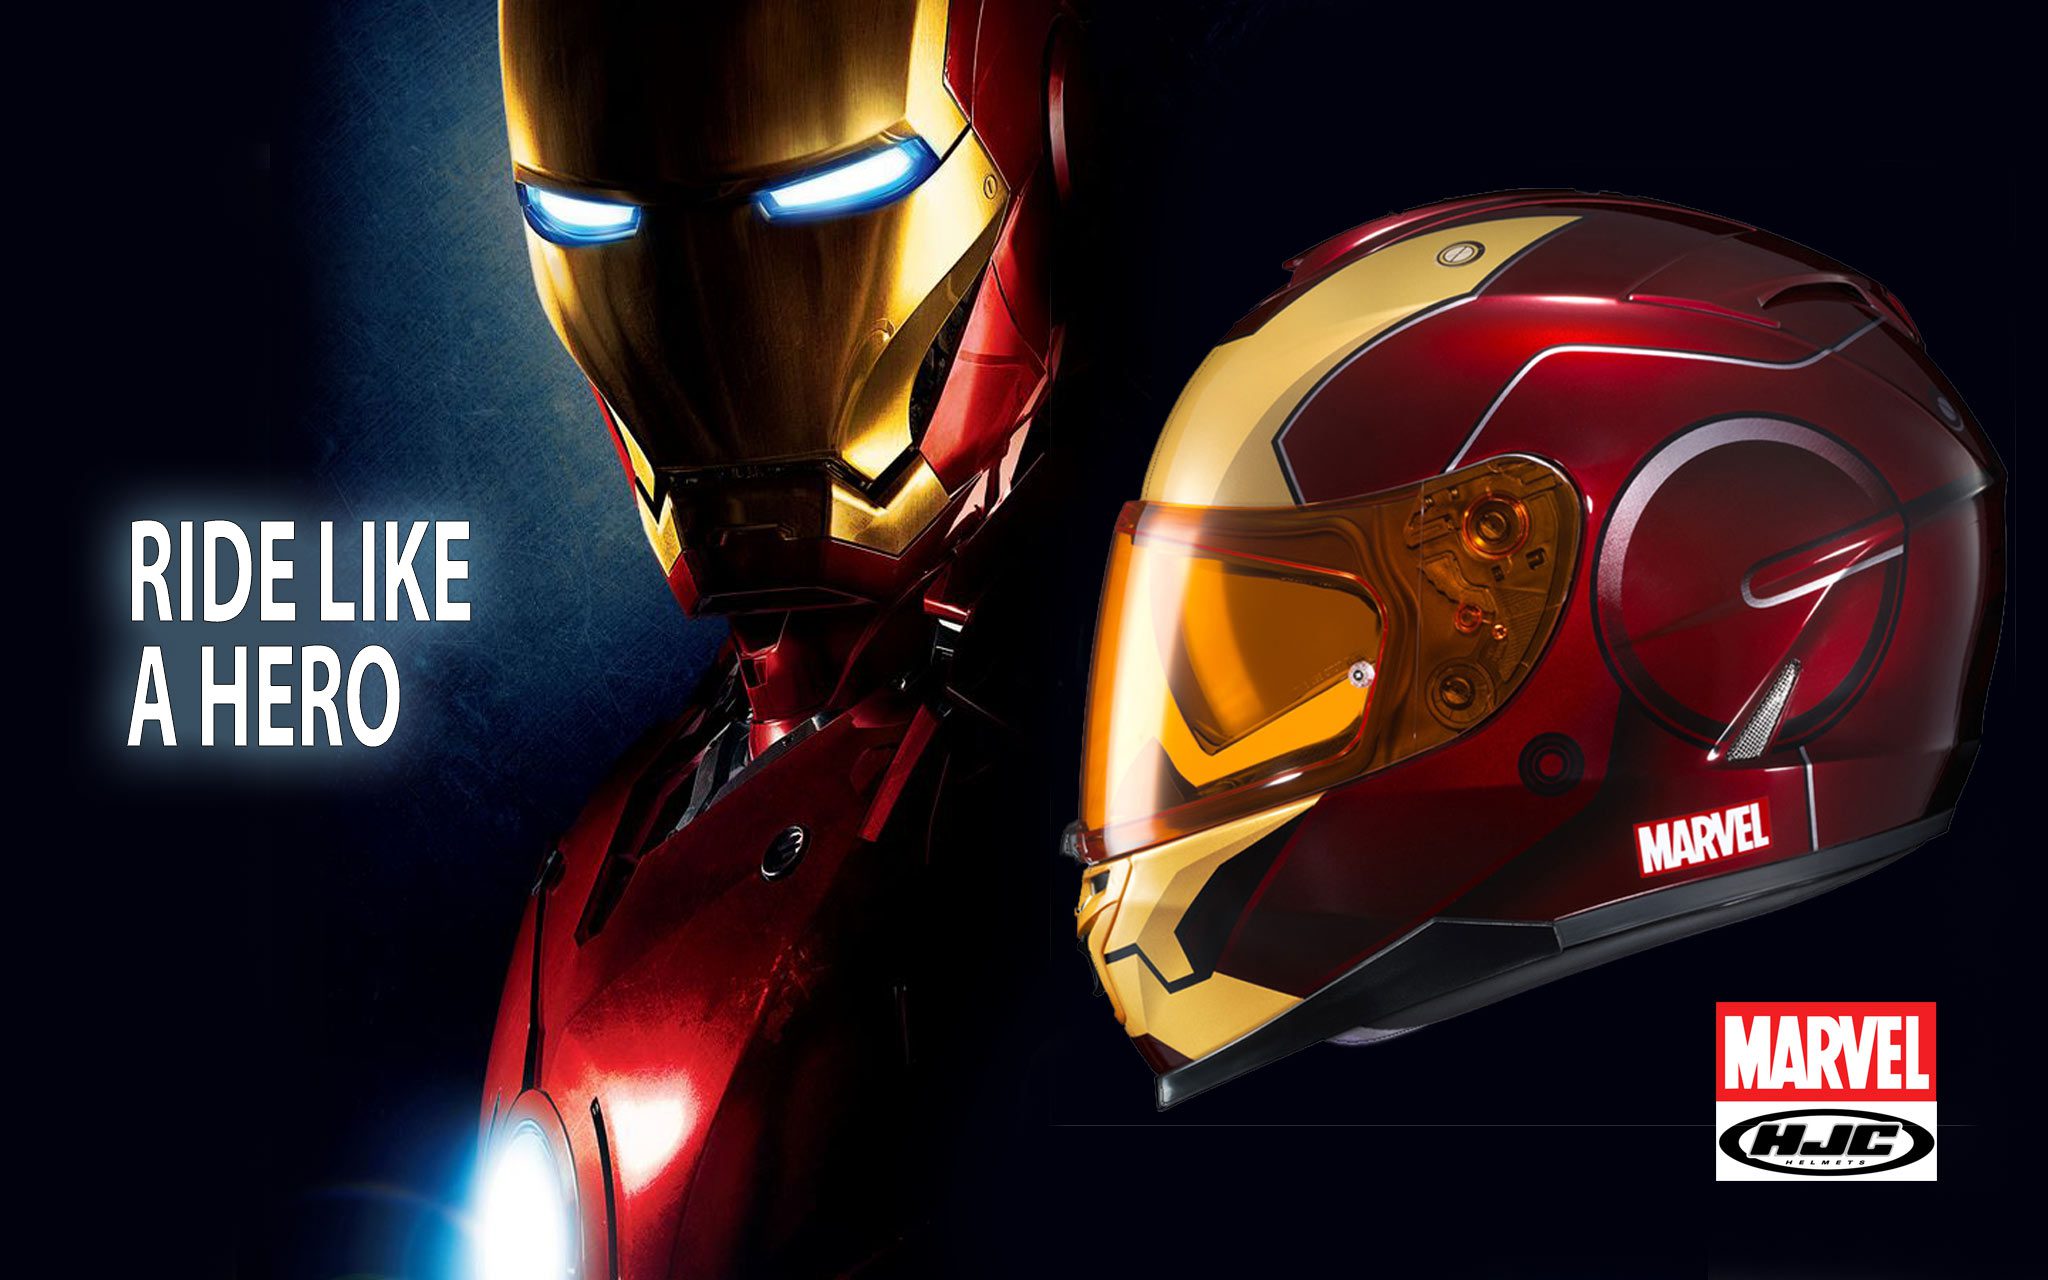 Official graphic from HJC and Marvel featuring the HJC Iron Man Helmet over movie poster for Iron Man, with the words "Ride like a hero"